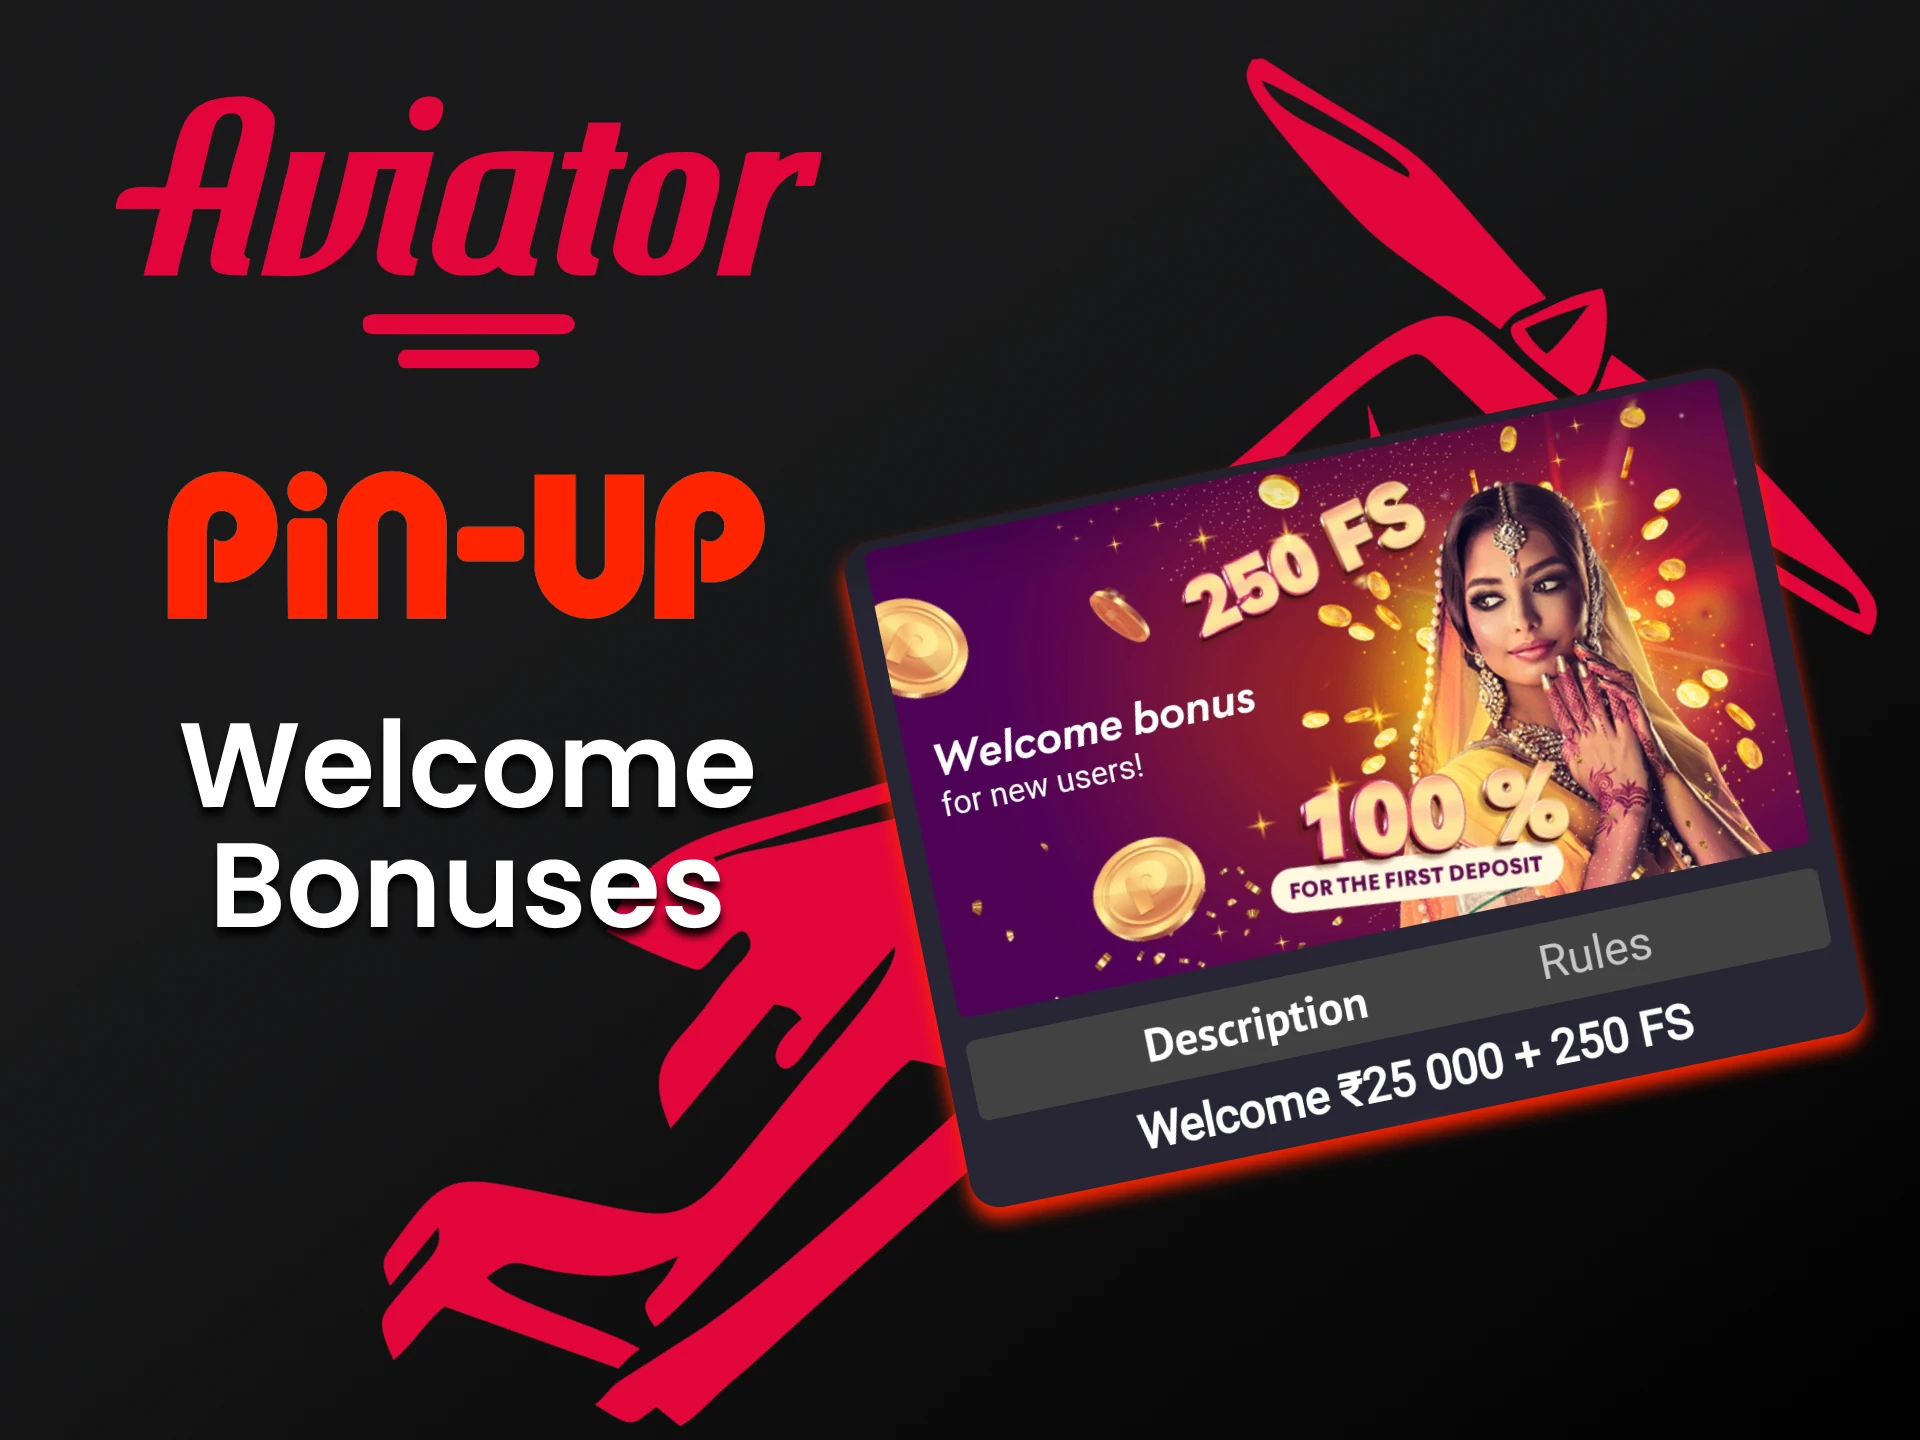 Get bonuses by playing Aviator on Pin Up.